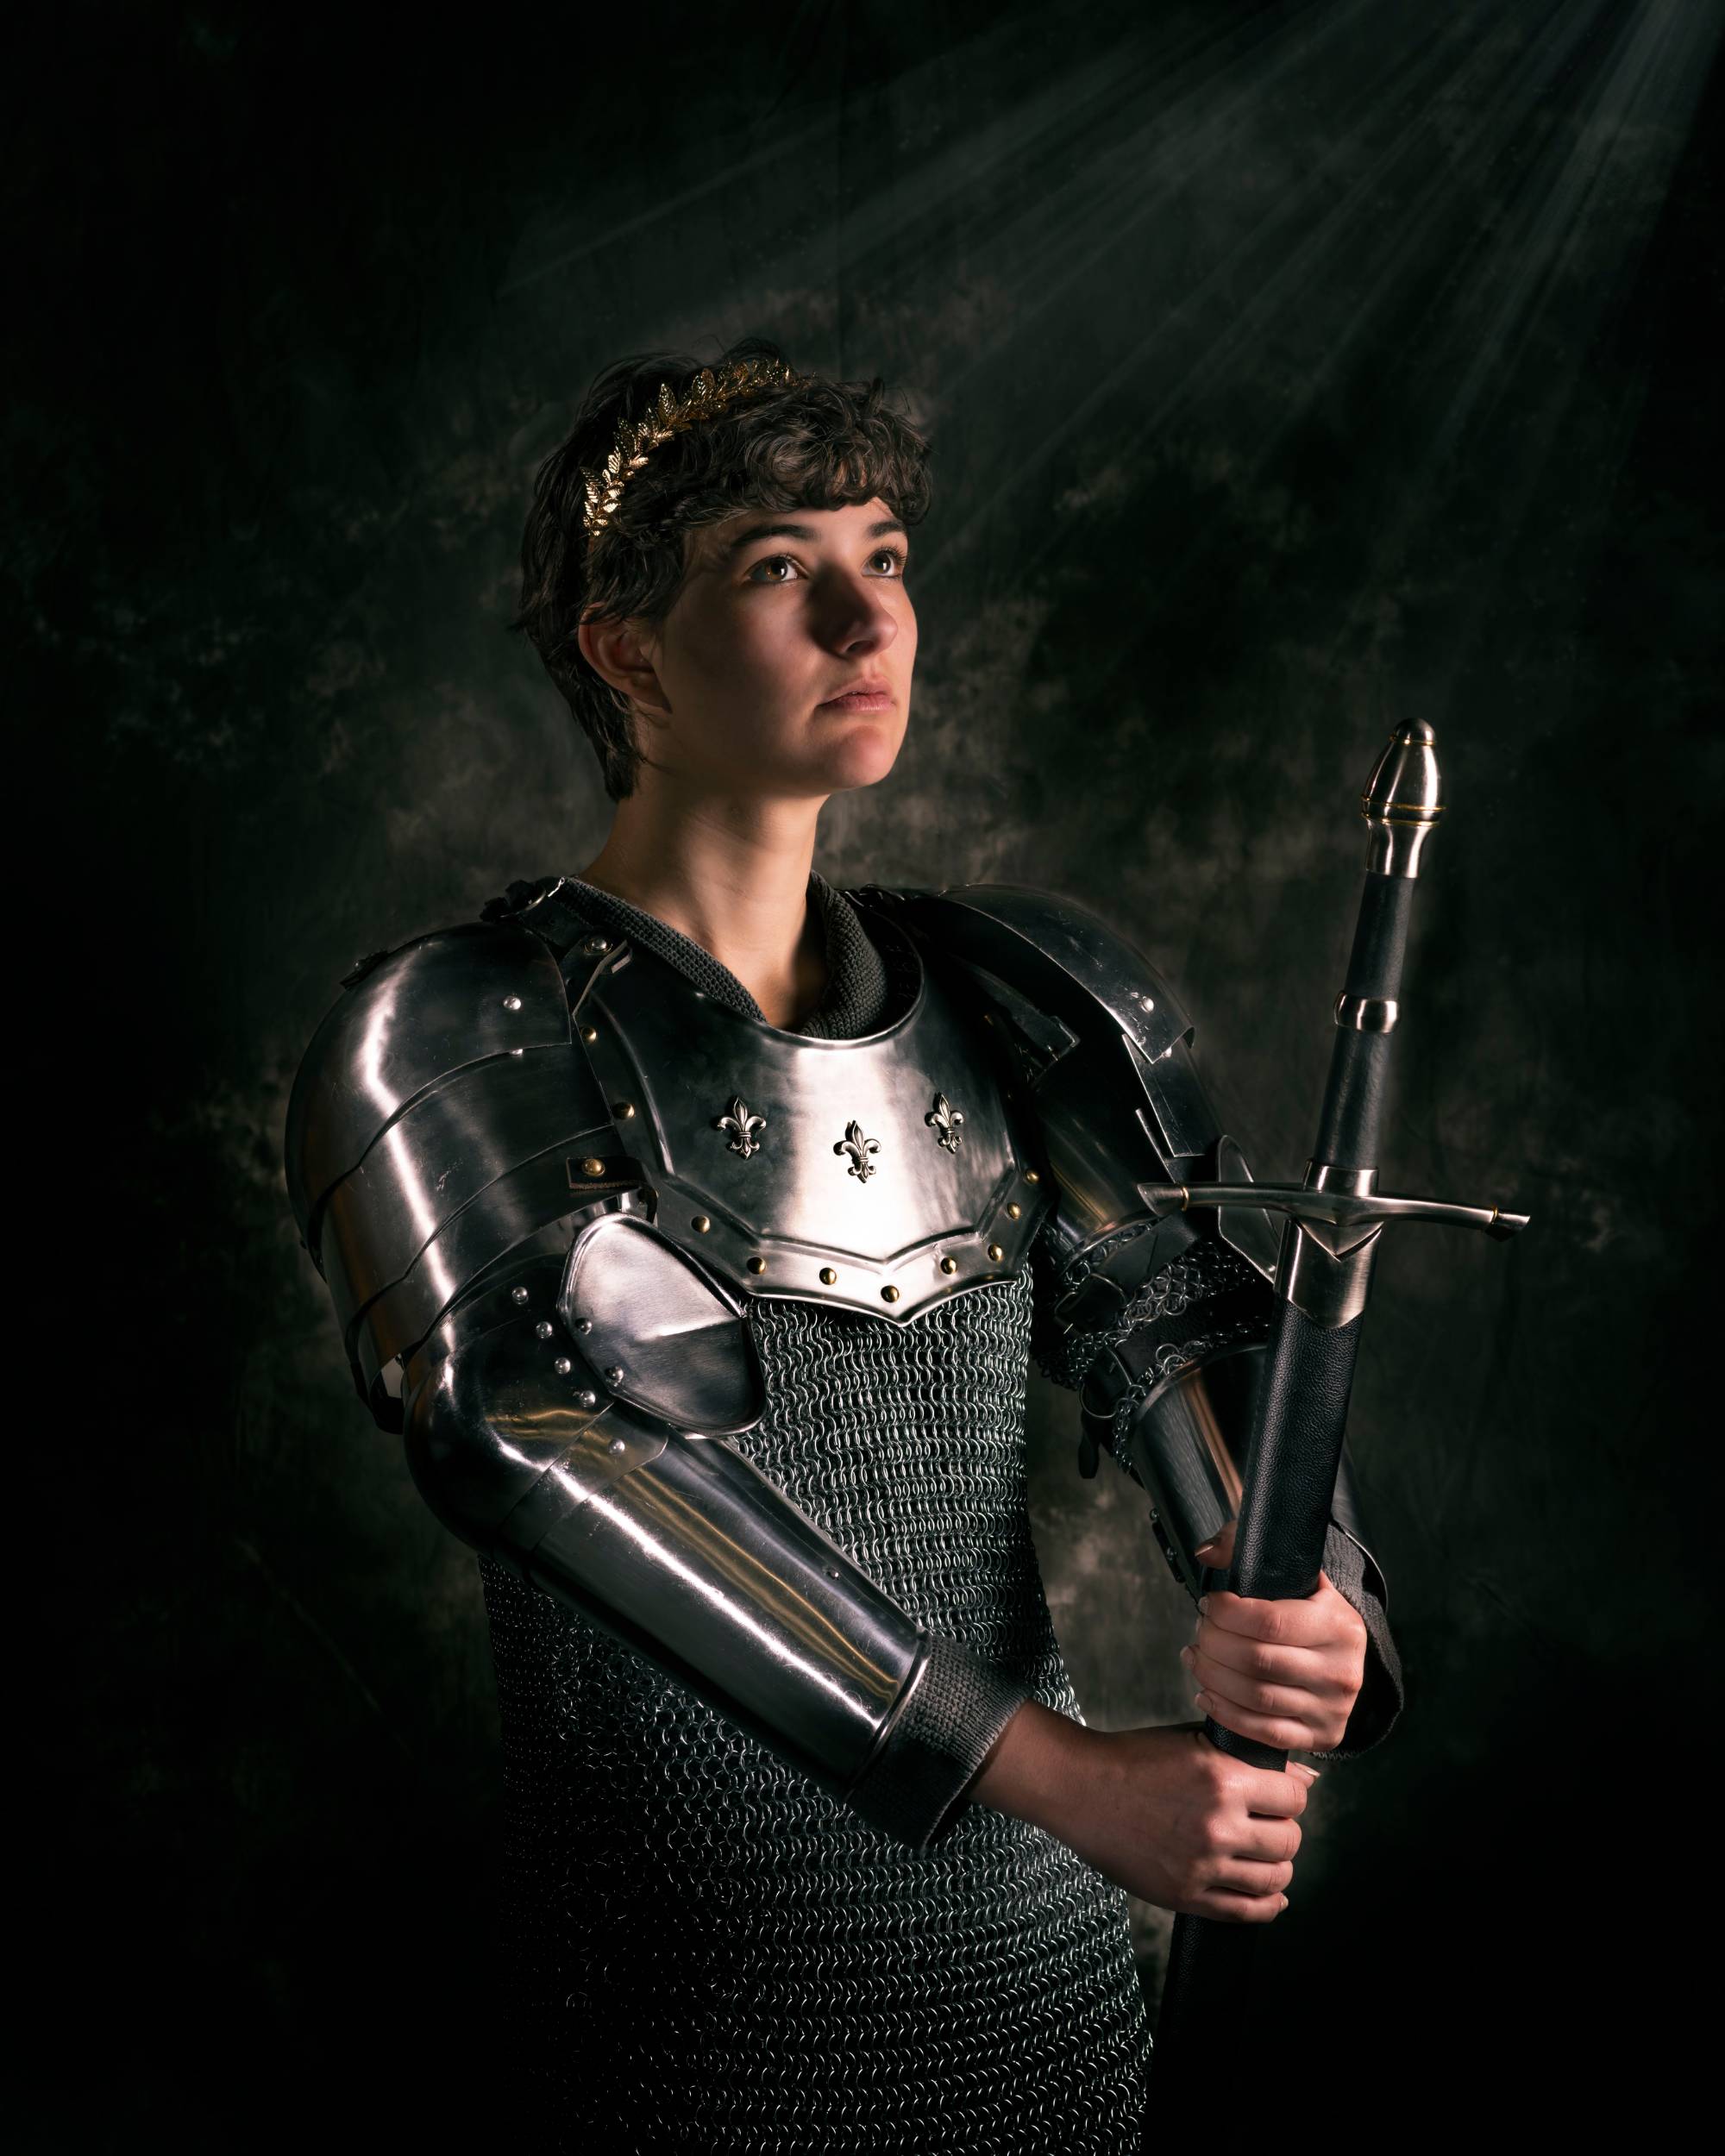 woman wearing medieval armor and holding sword